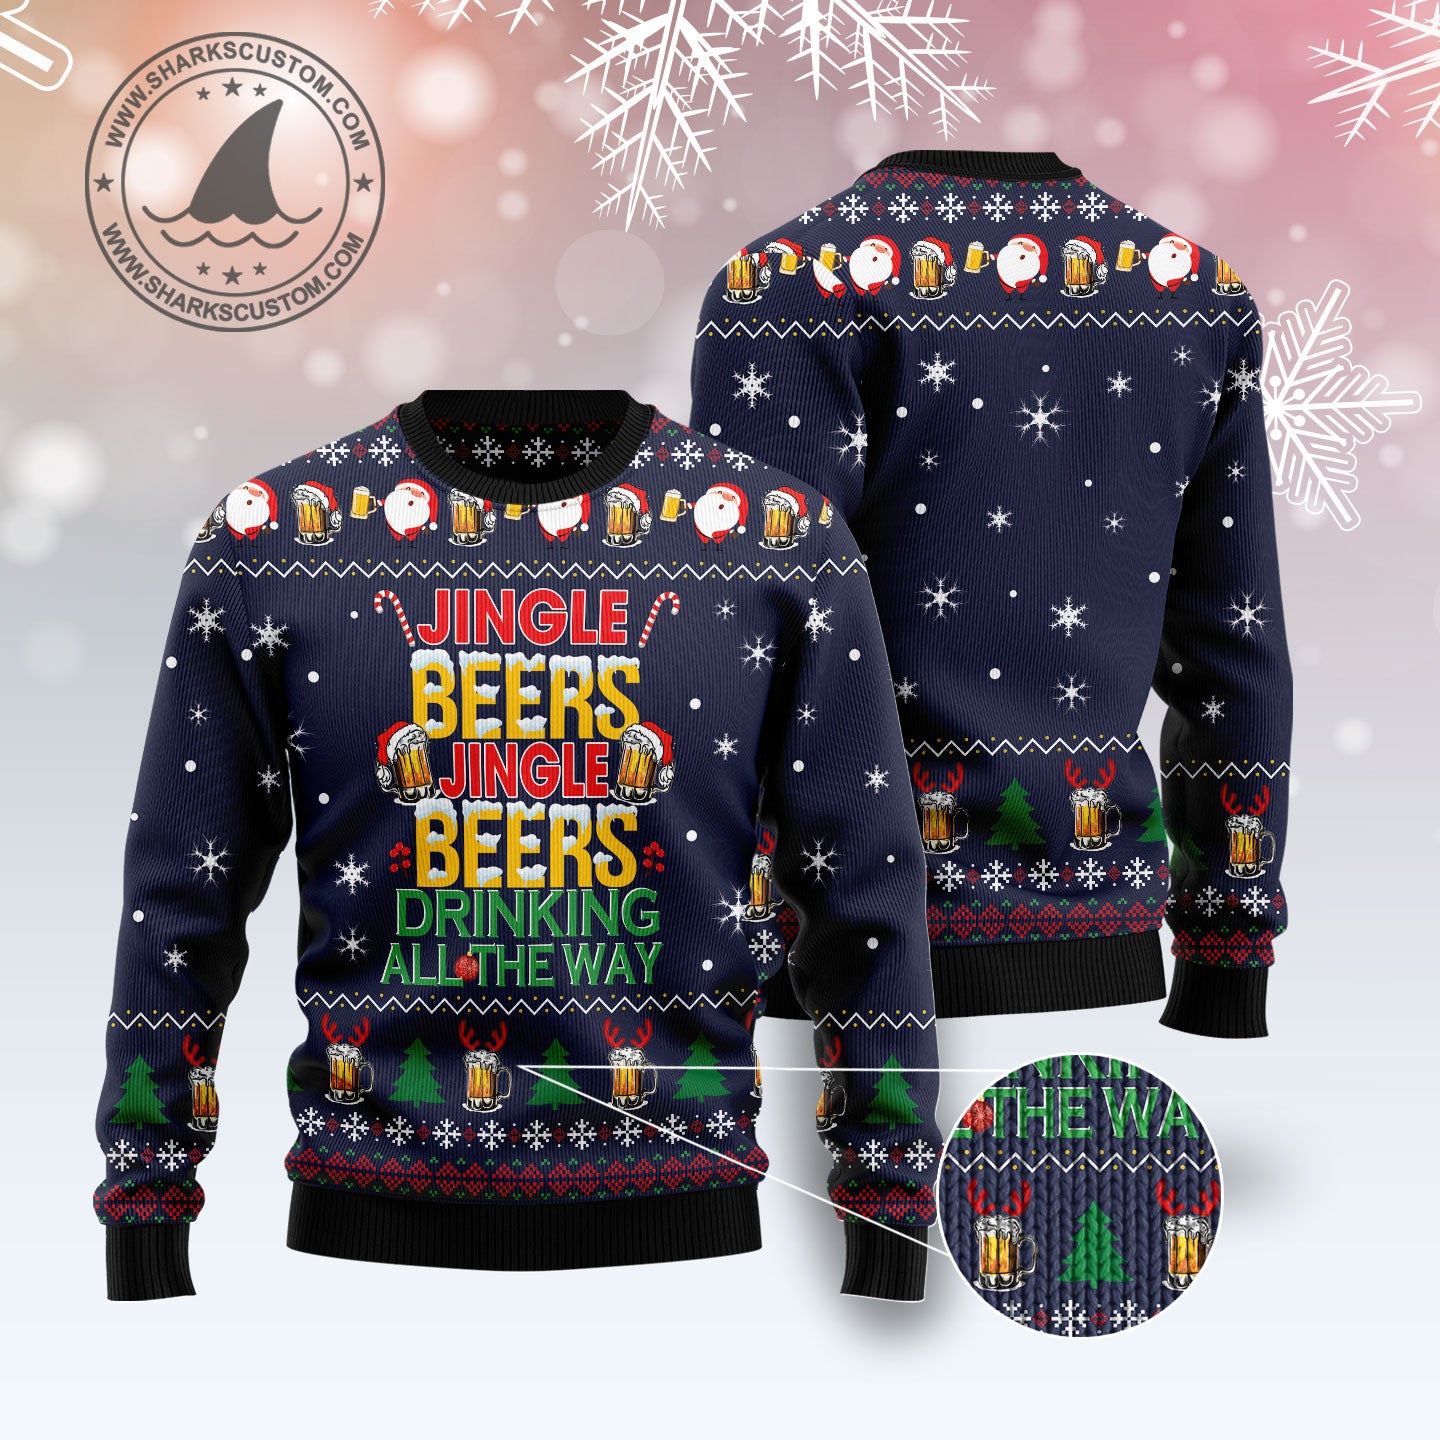 Jingle Beers Drinking All The Ways G5115 Ugly Christmas Sweater